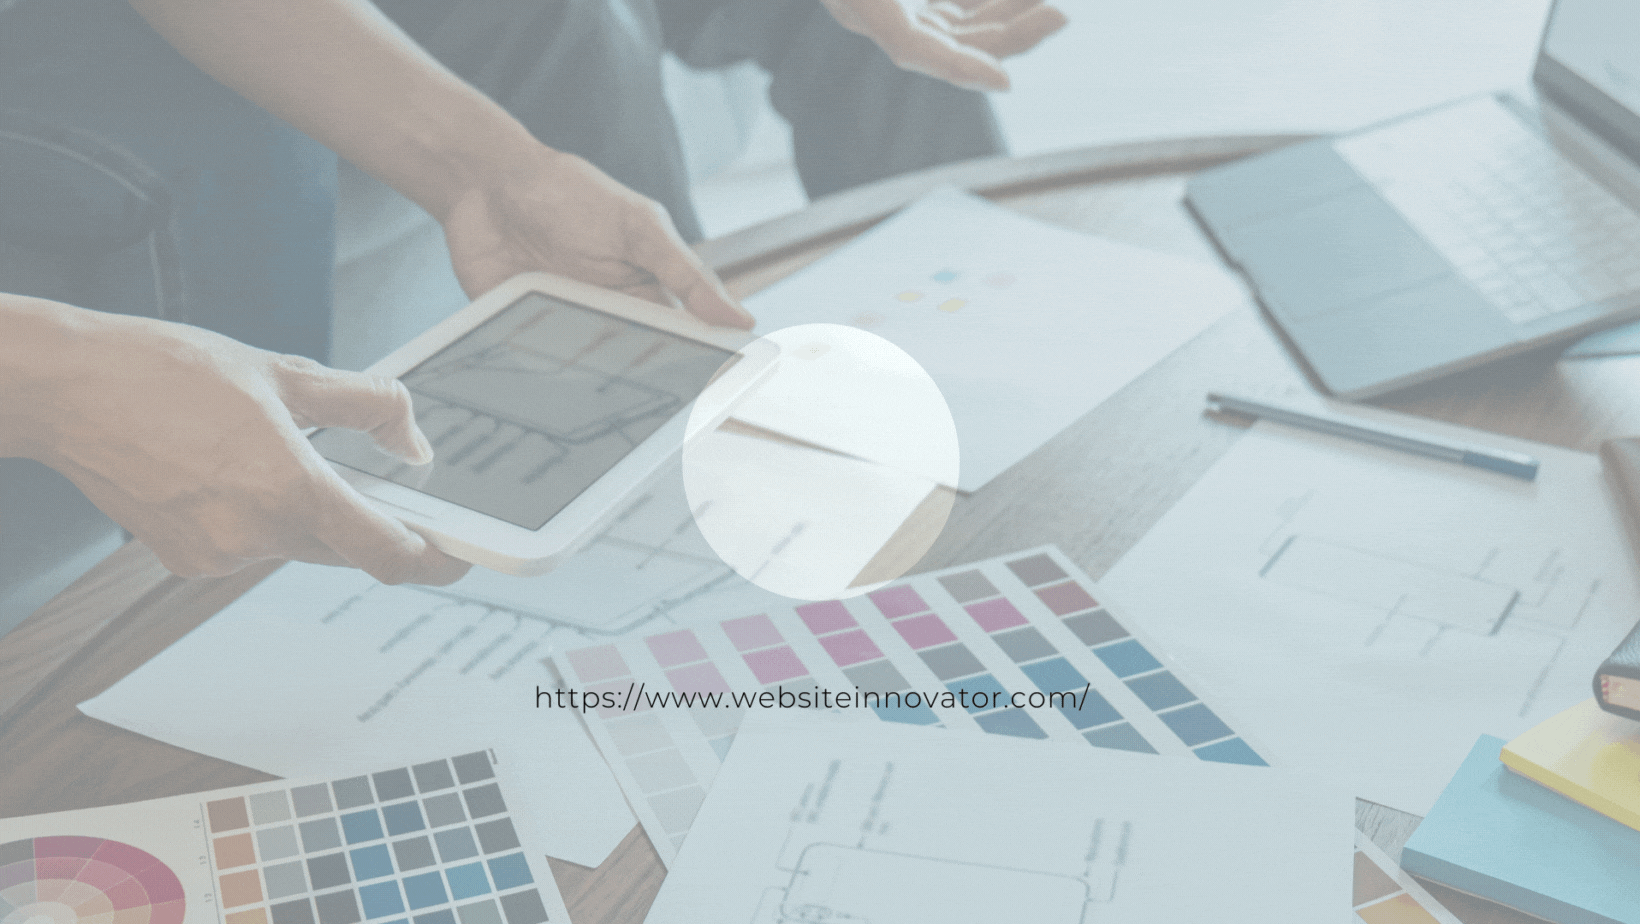 The Benefits of Investing in Professional Website Design